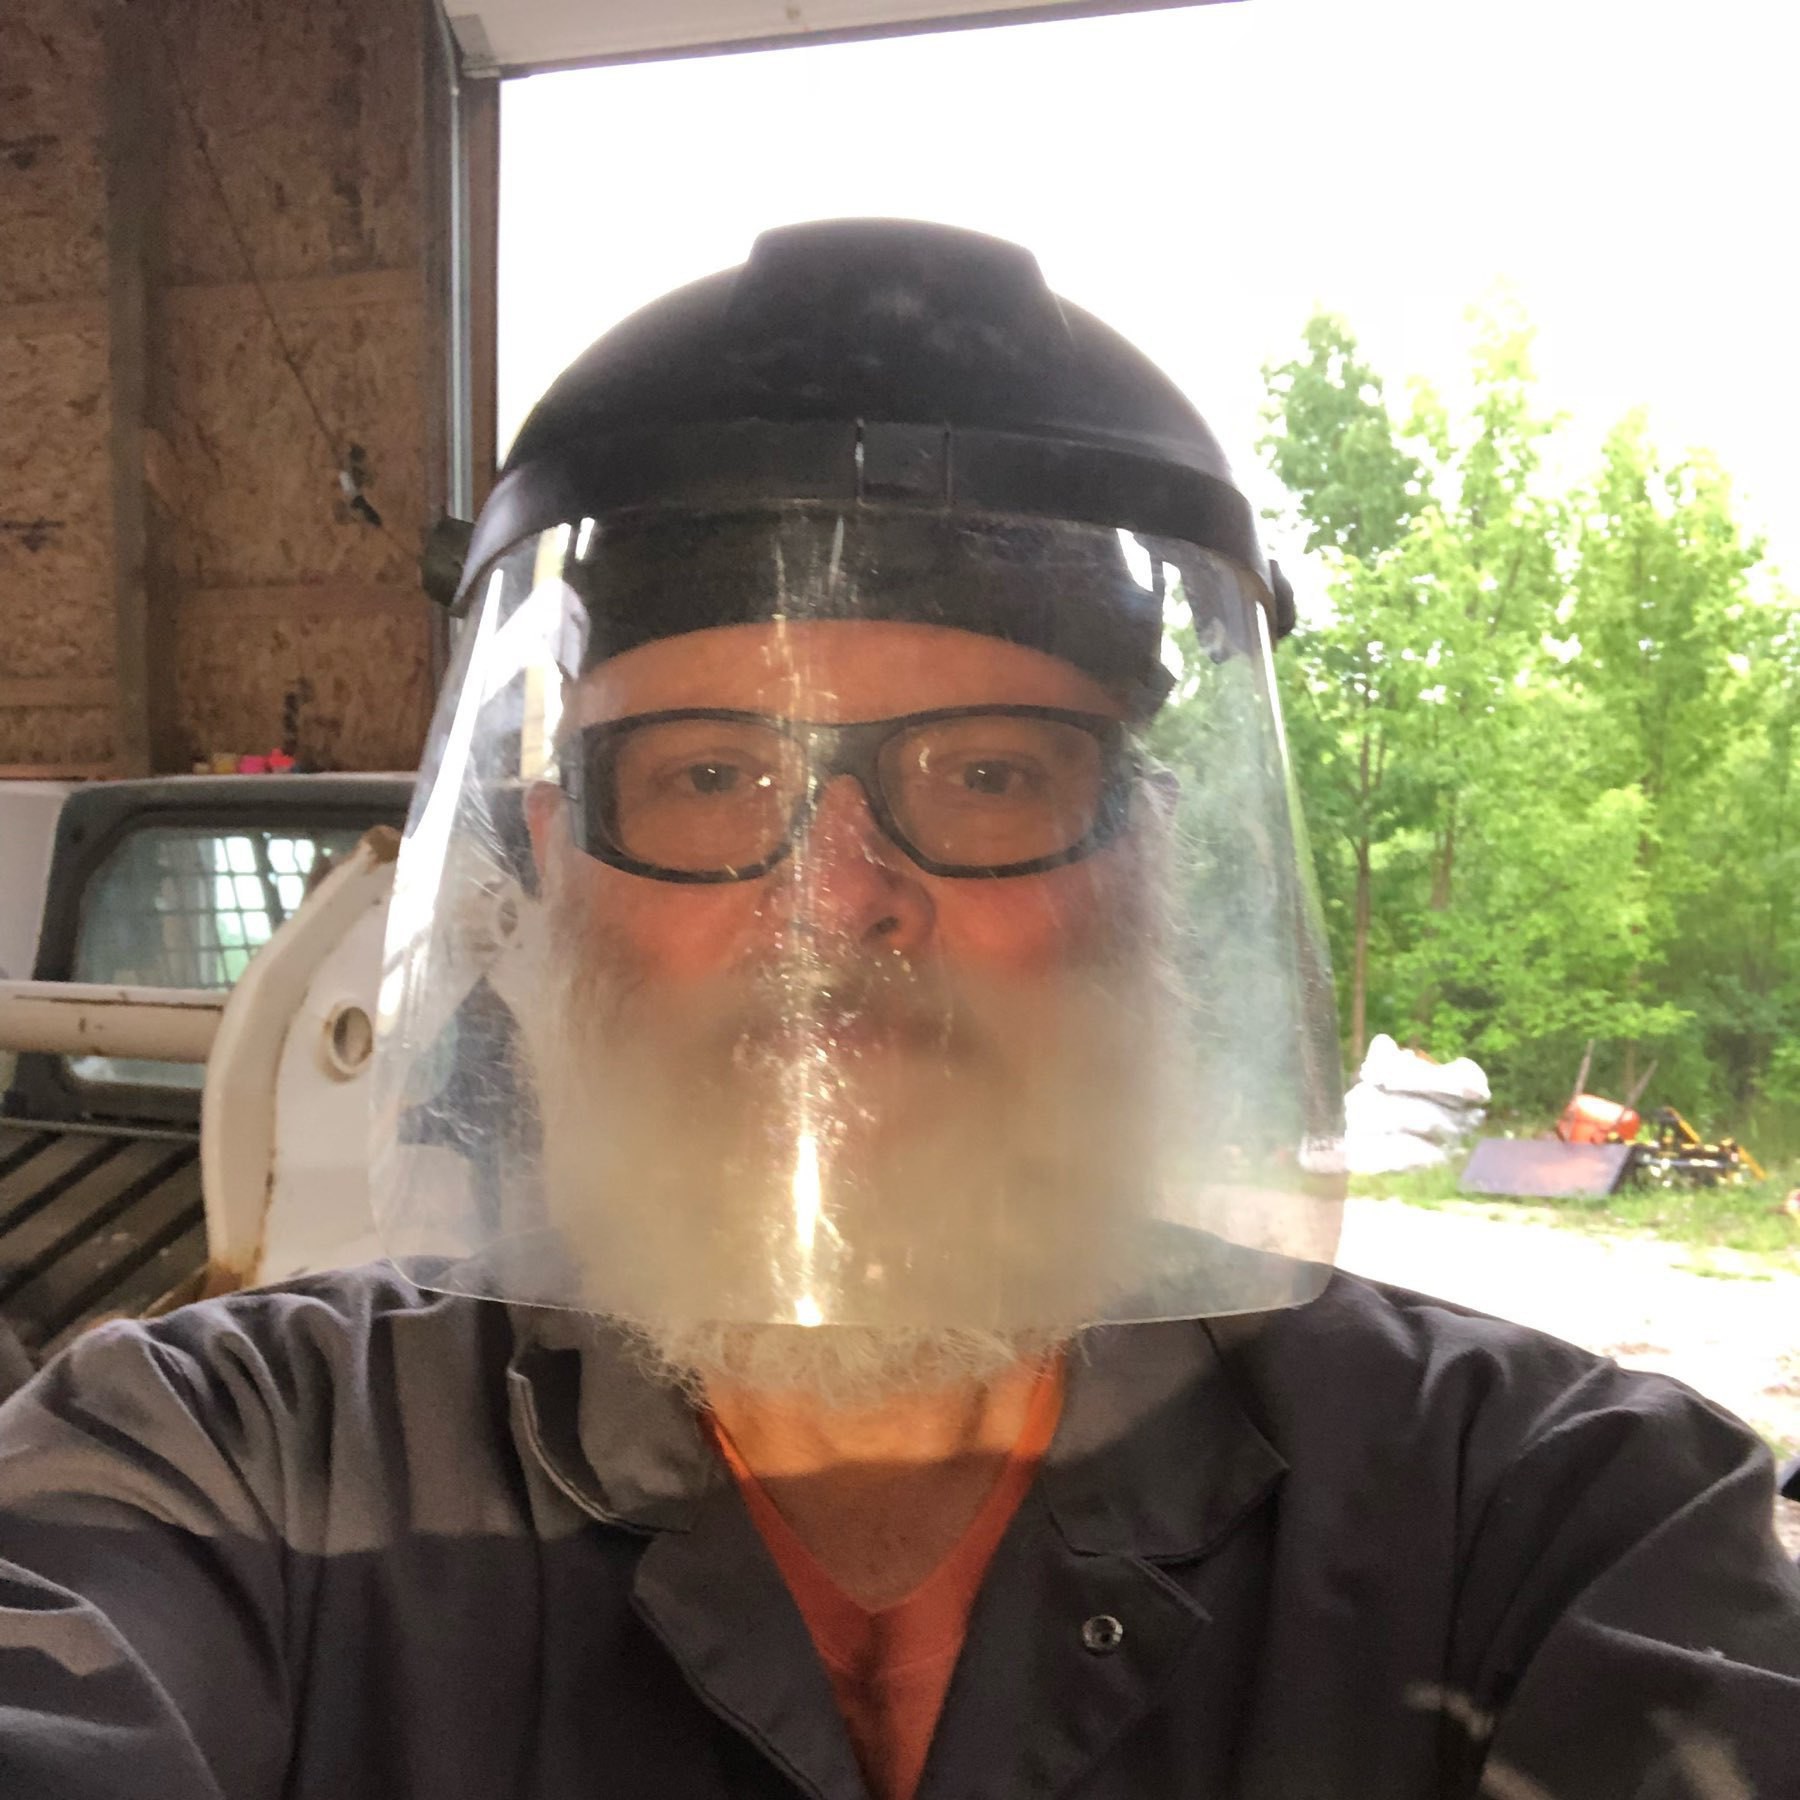 safety glasses and face shield being worn